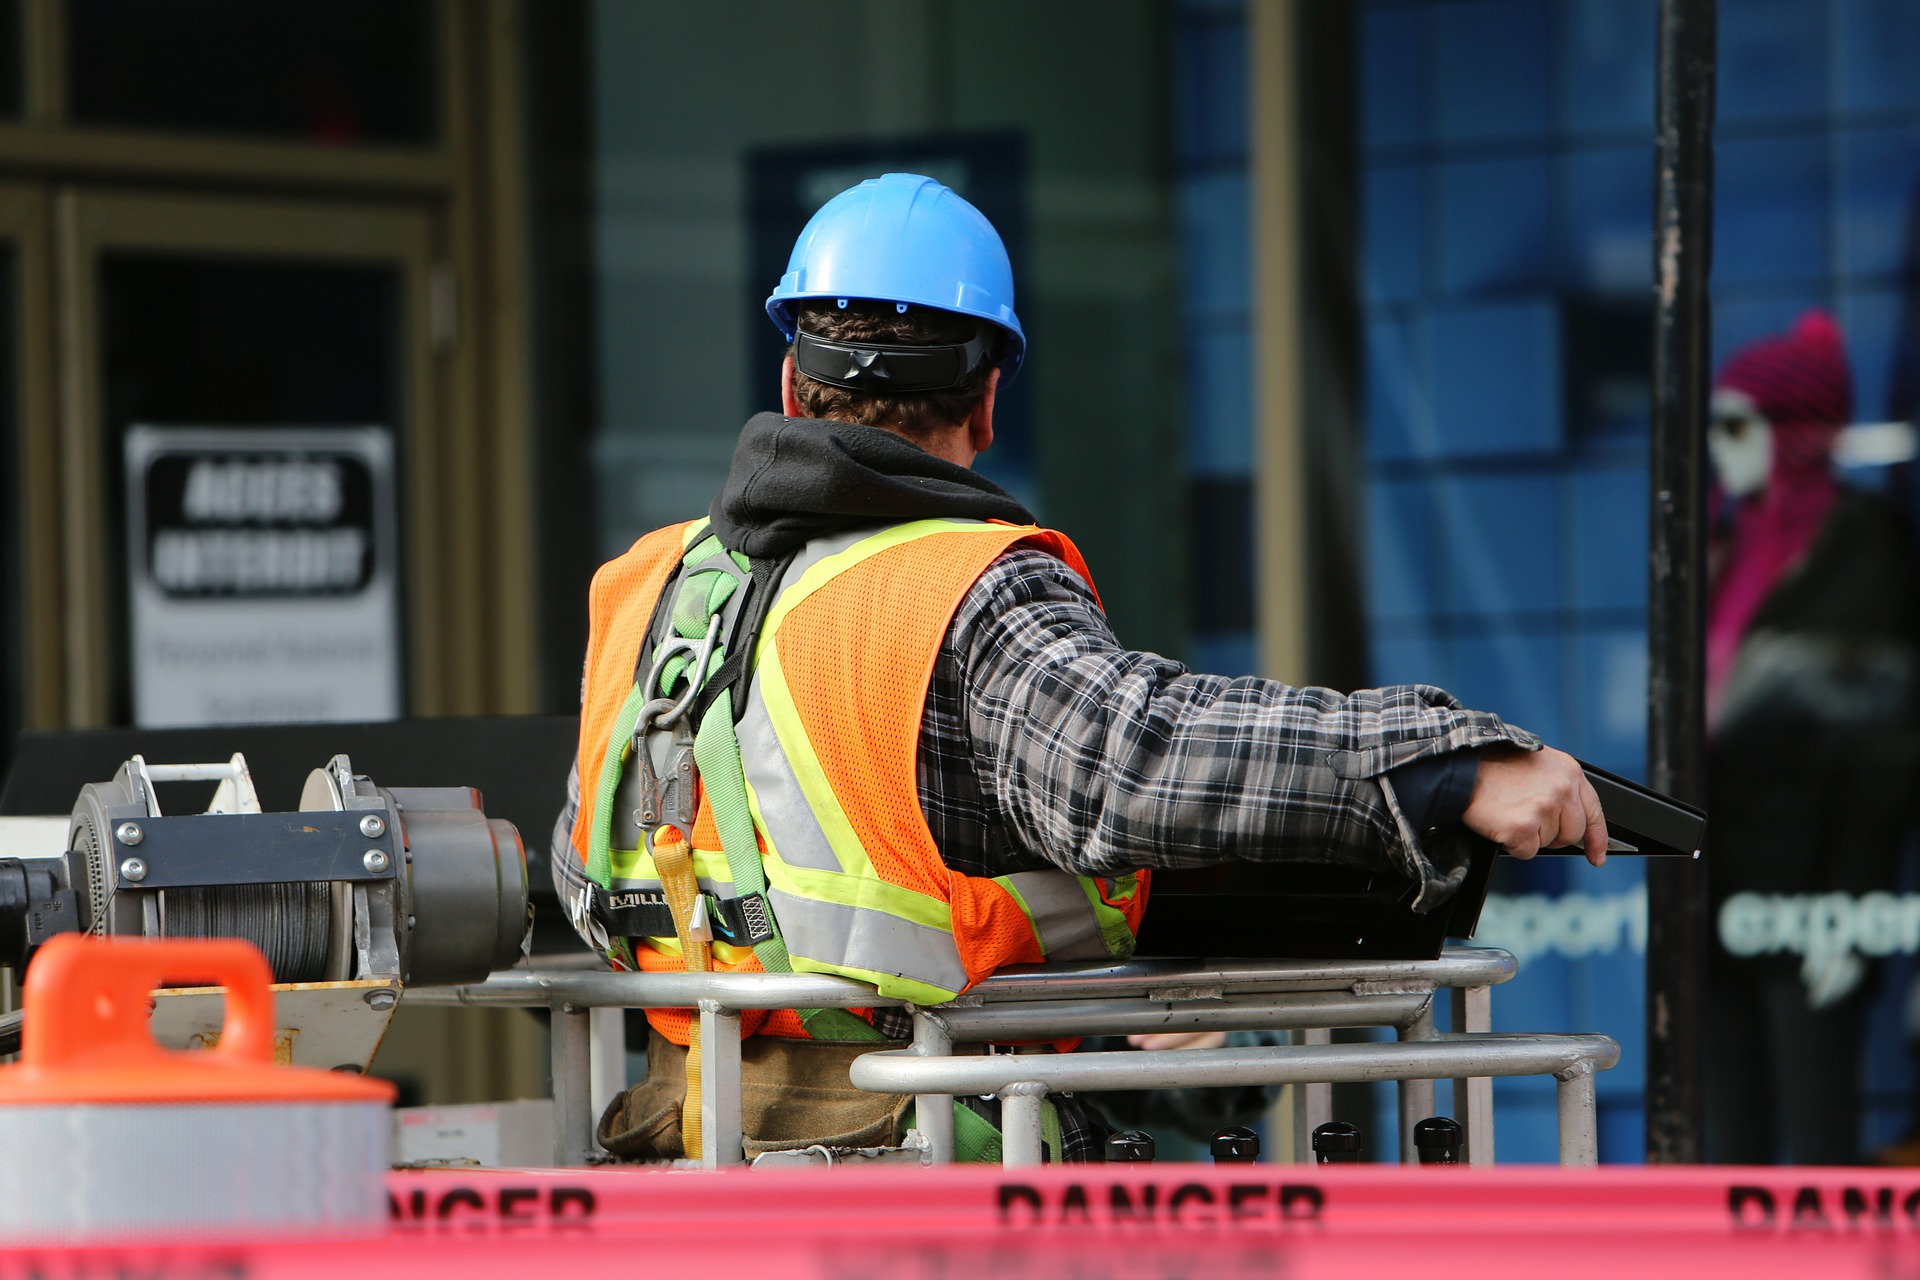 Contractor Safety: How to Boost Contractor Compliance